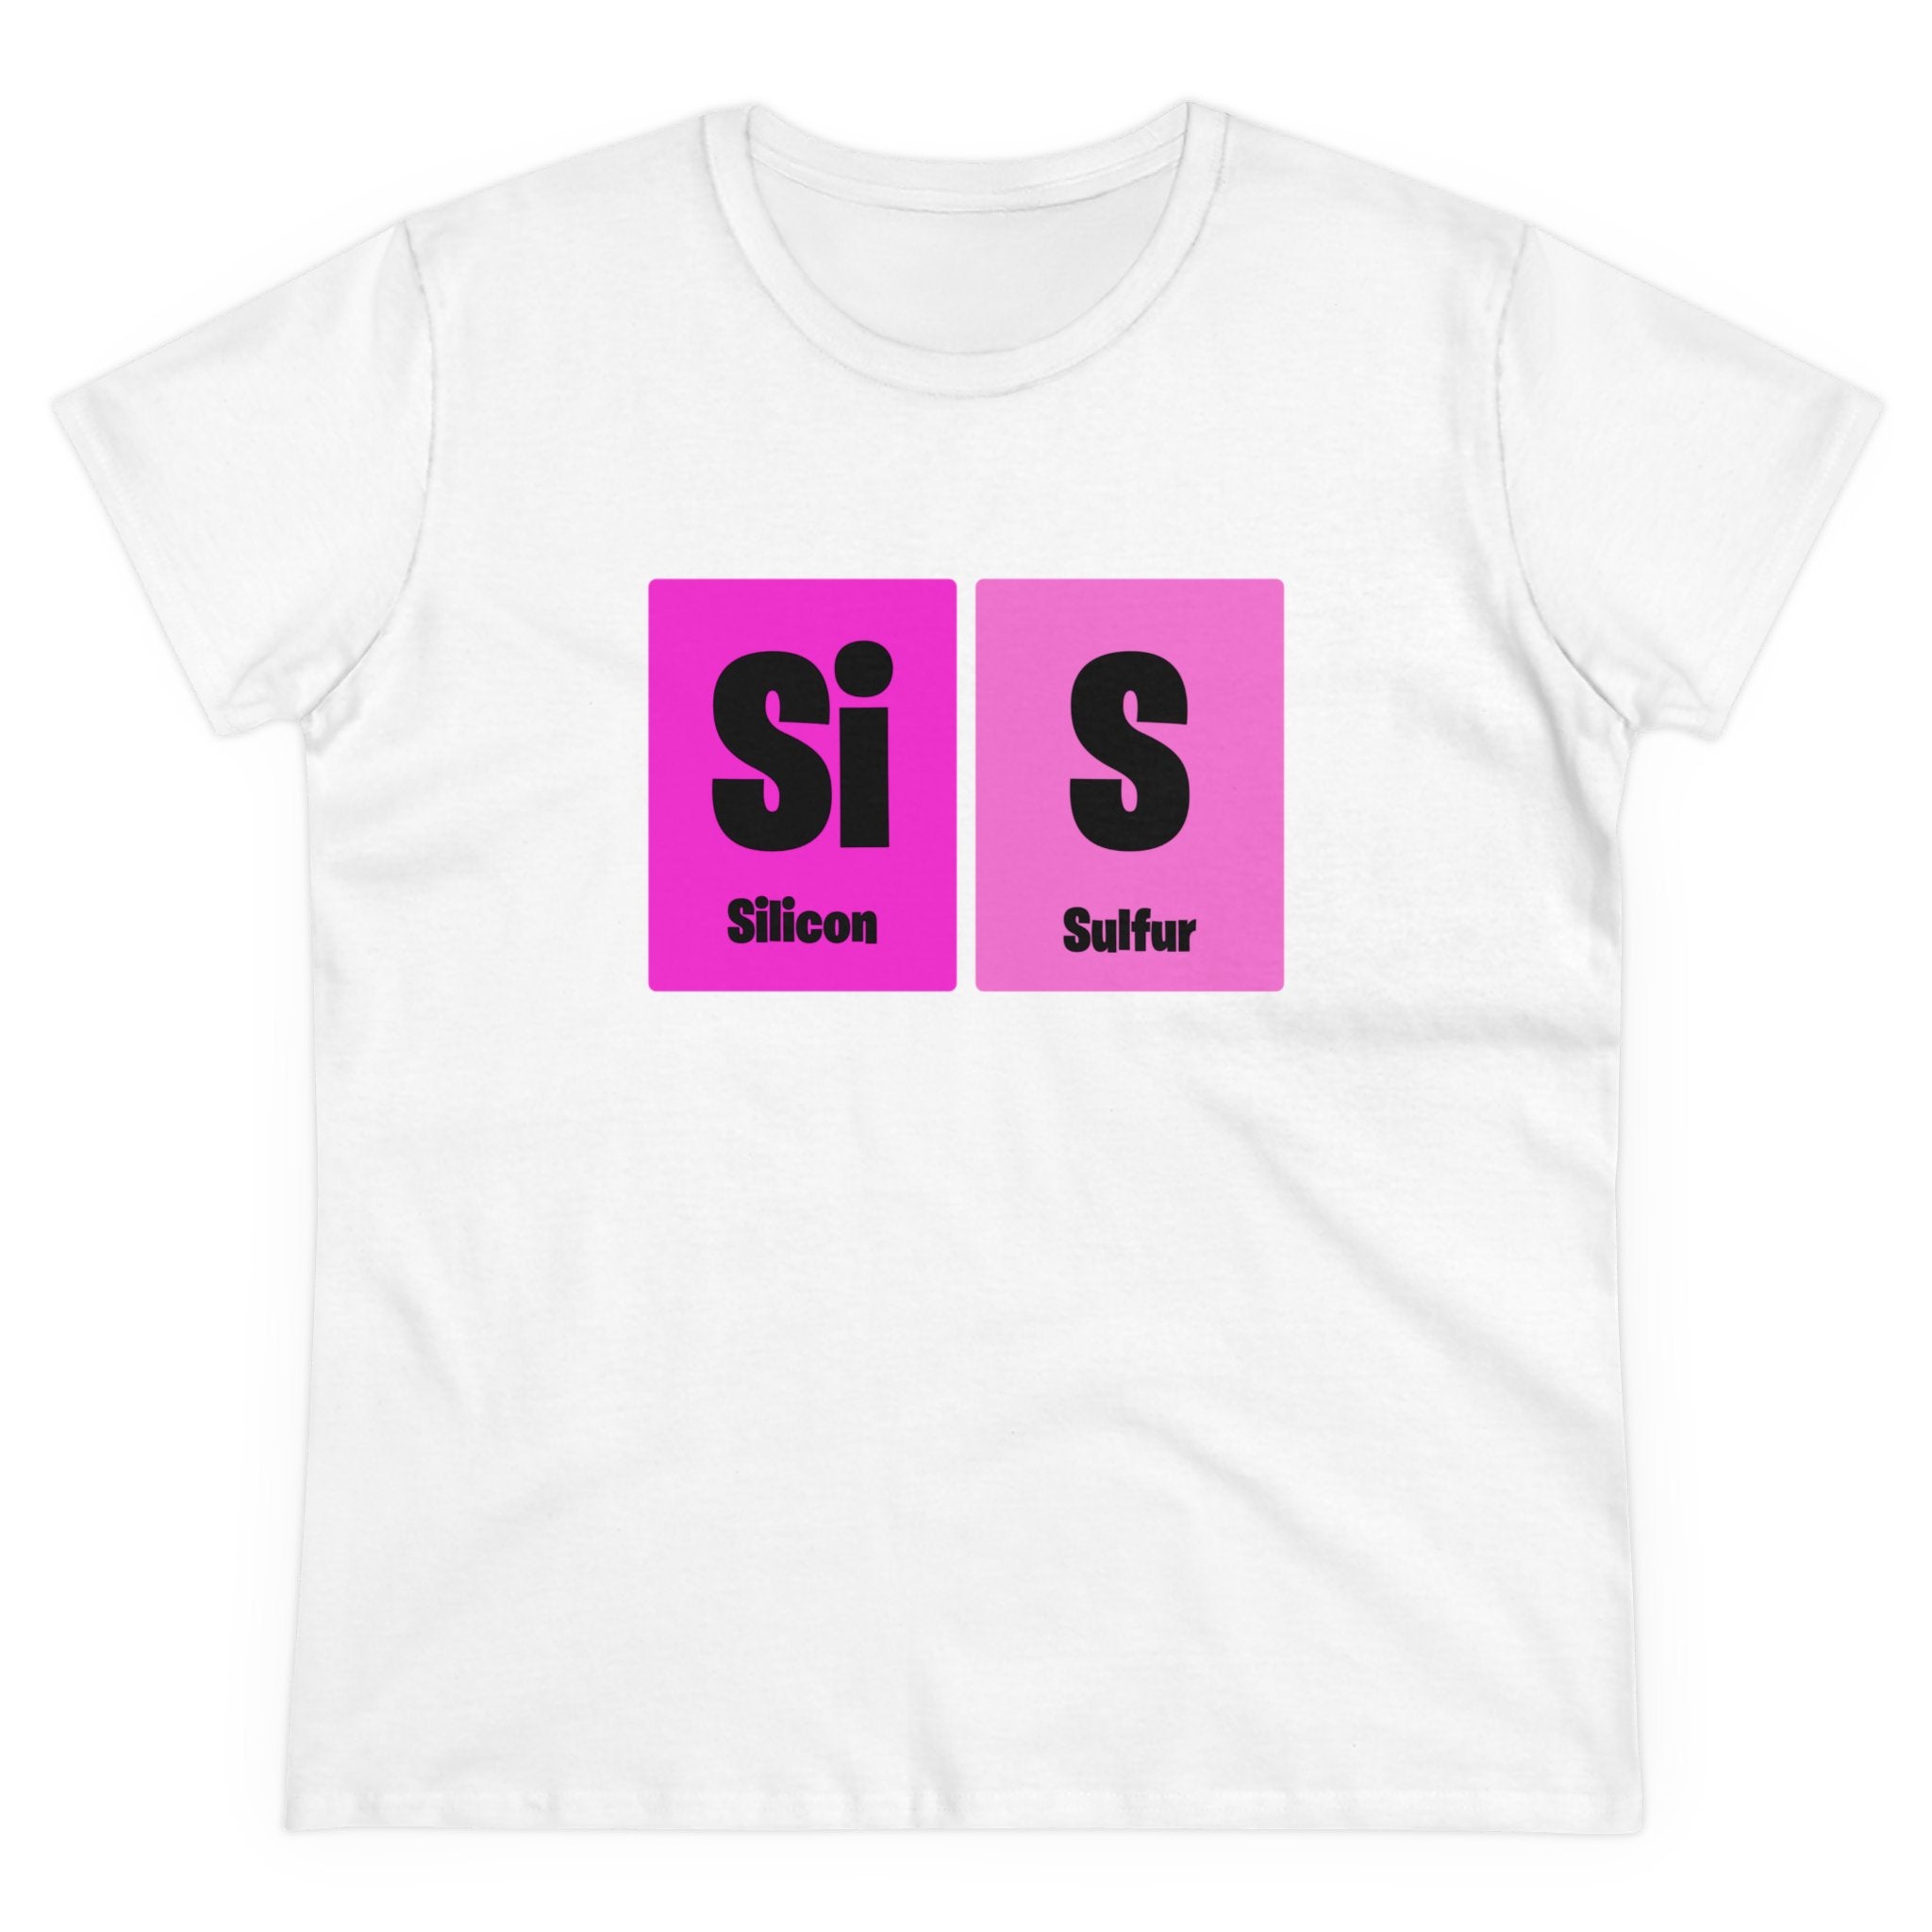 A cozy fashion Si-S Light Pendant - Women's Tee featuring a white design with pink periodic table element blocks for Silicon (Si) and Sulfur (S).